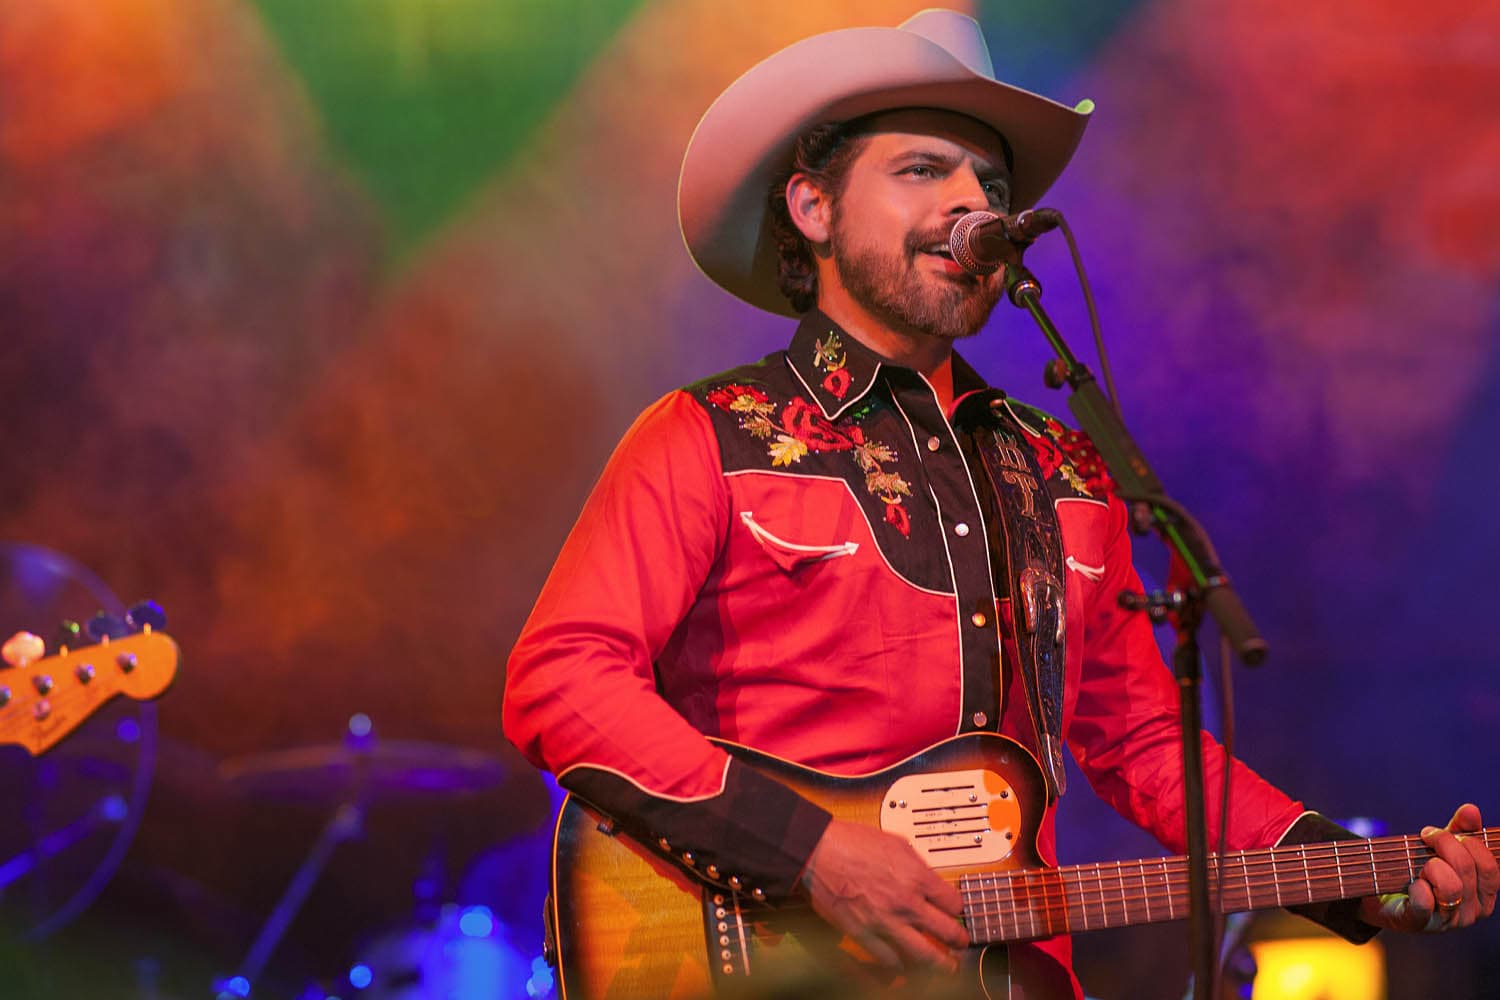 Country Music Star Rick Trevino Sings About LatinAmerican Identity